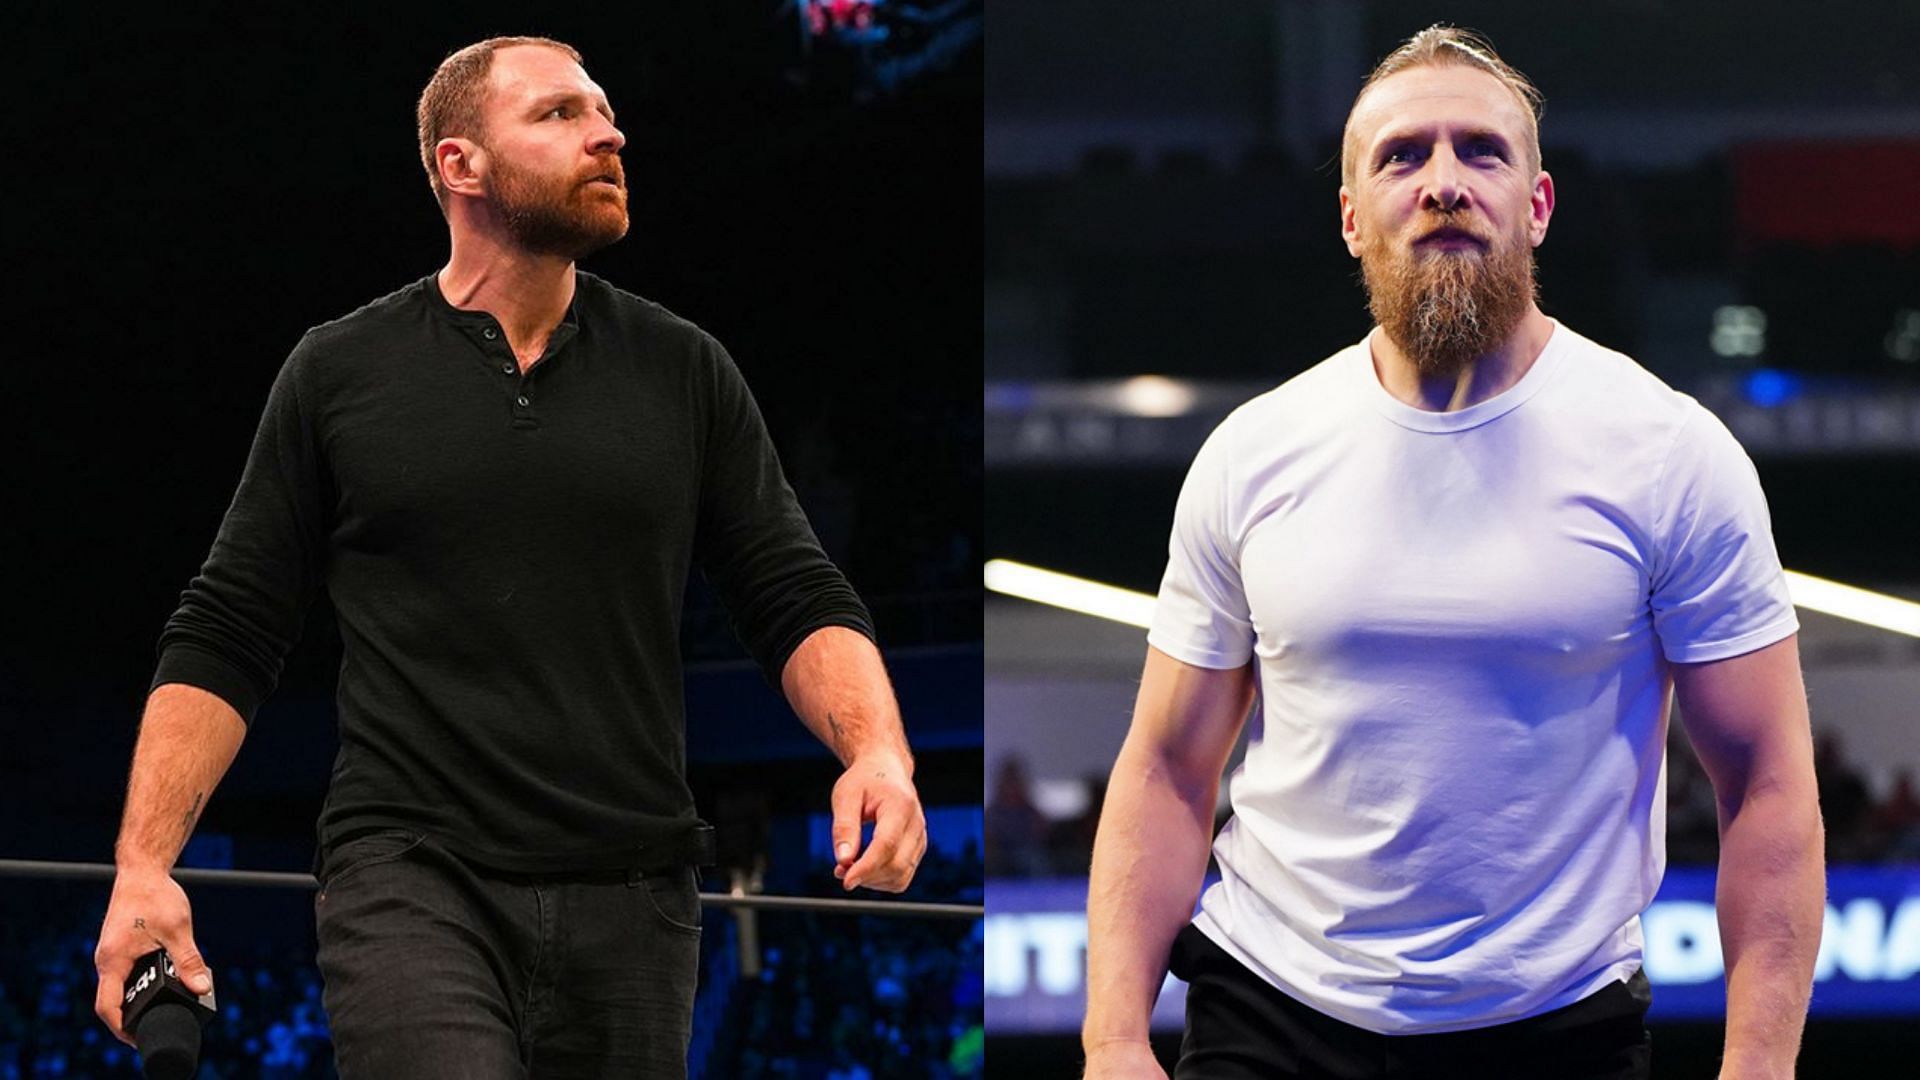 AEW is teasing a potential feud between Jon Moxley (left) and Bryan Danielson (right)